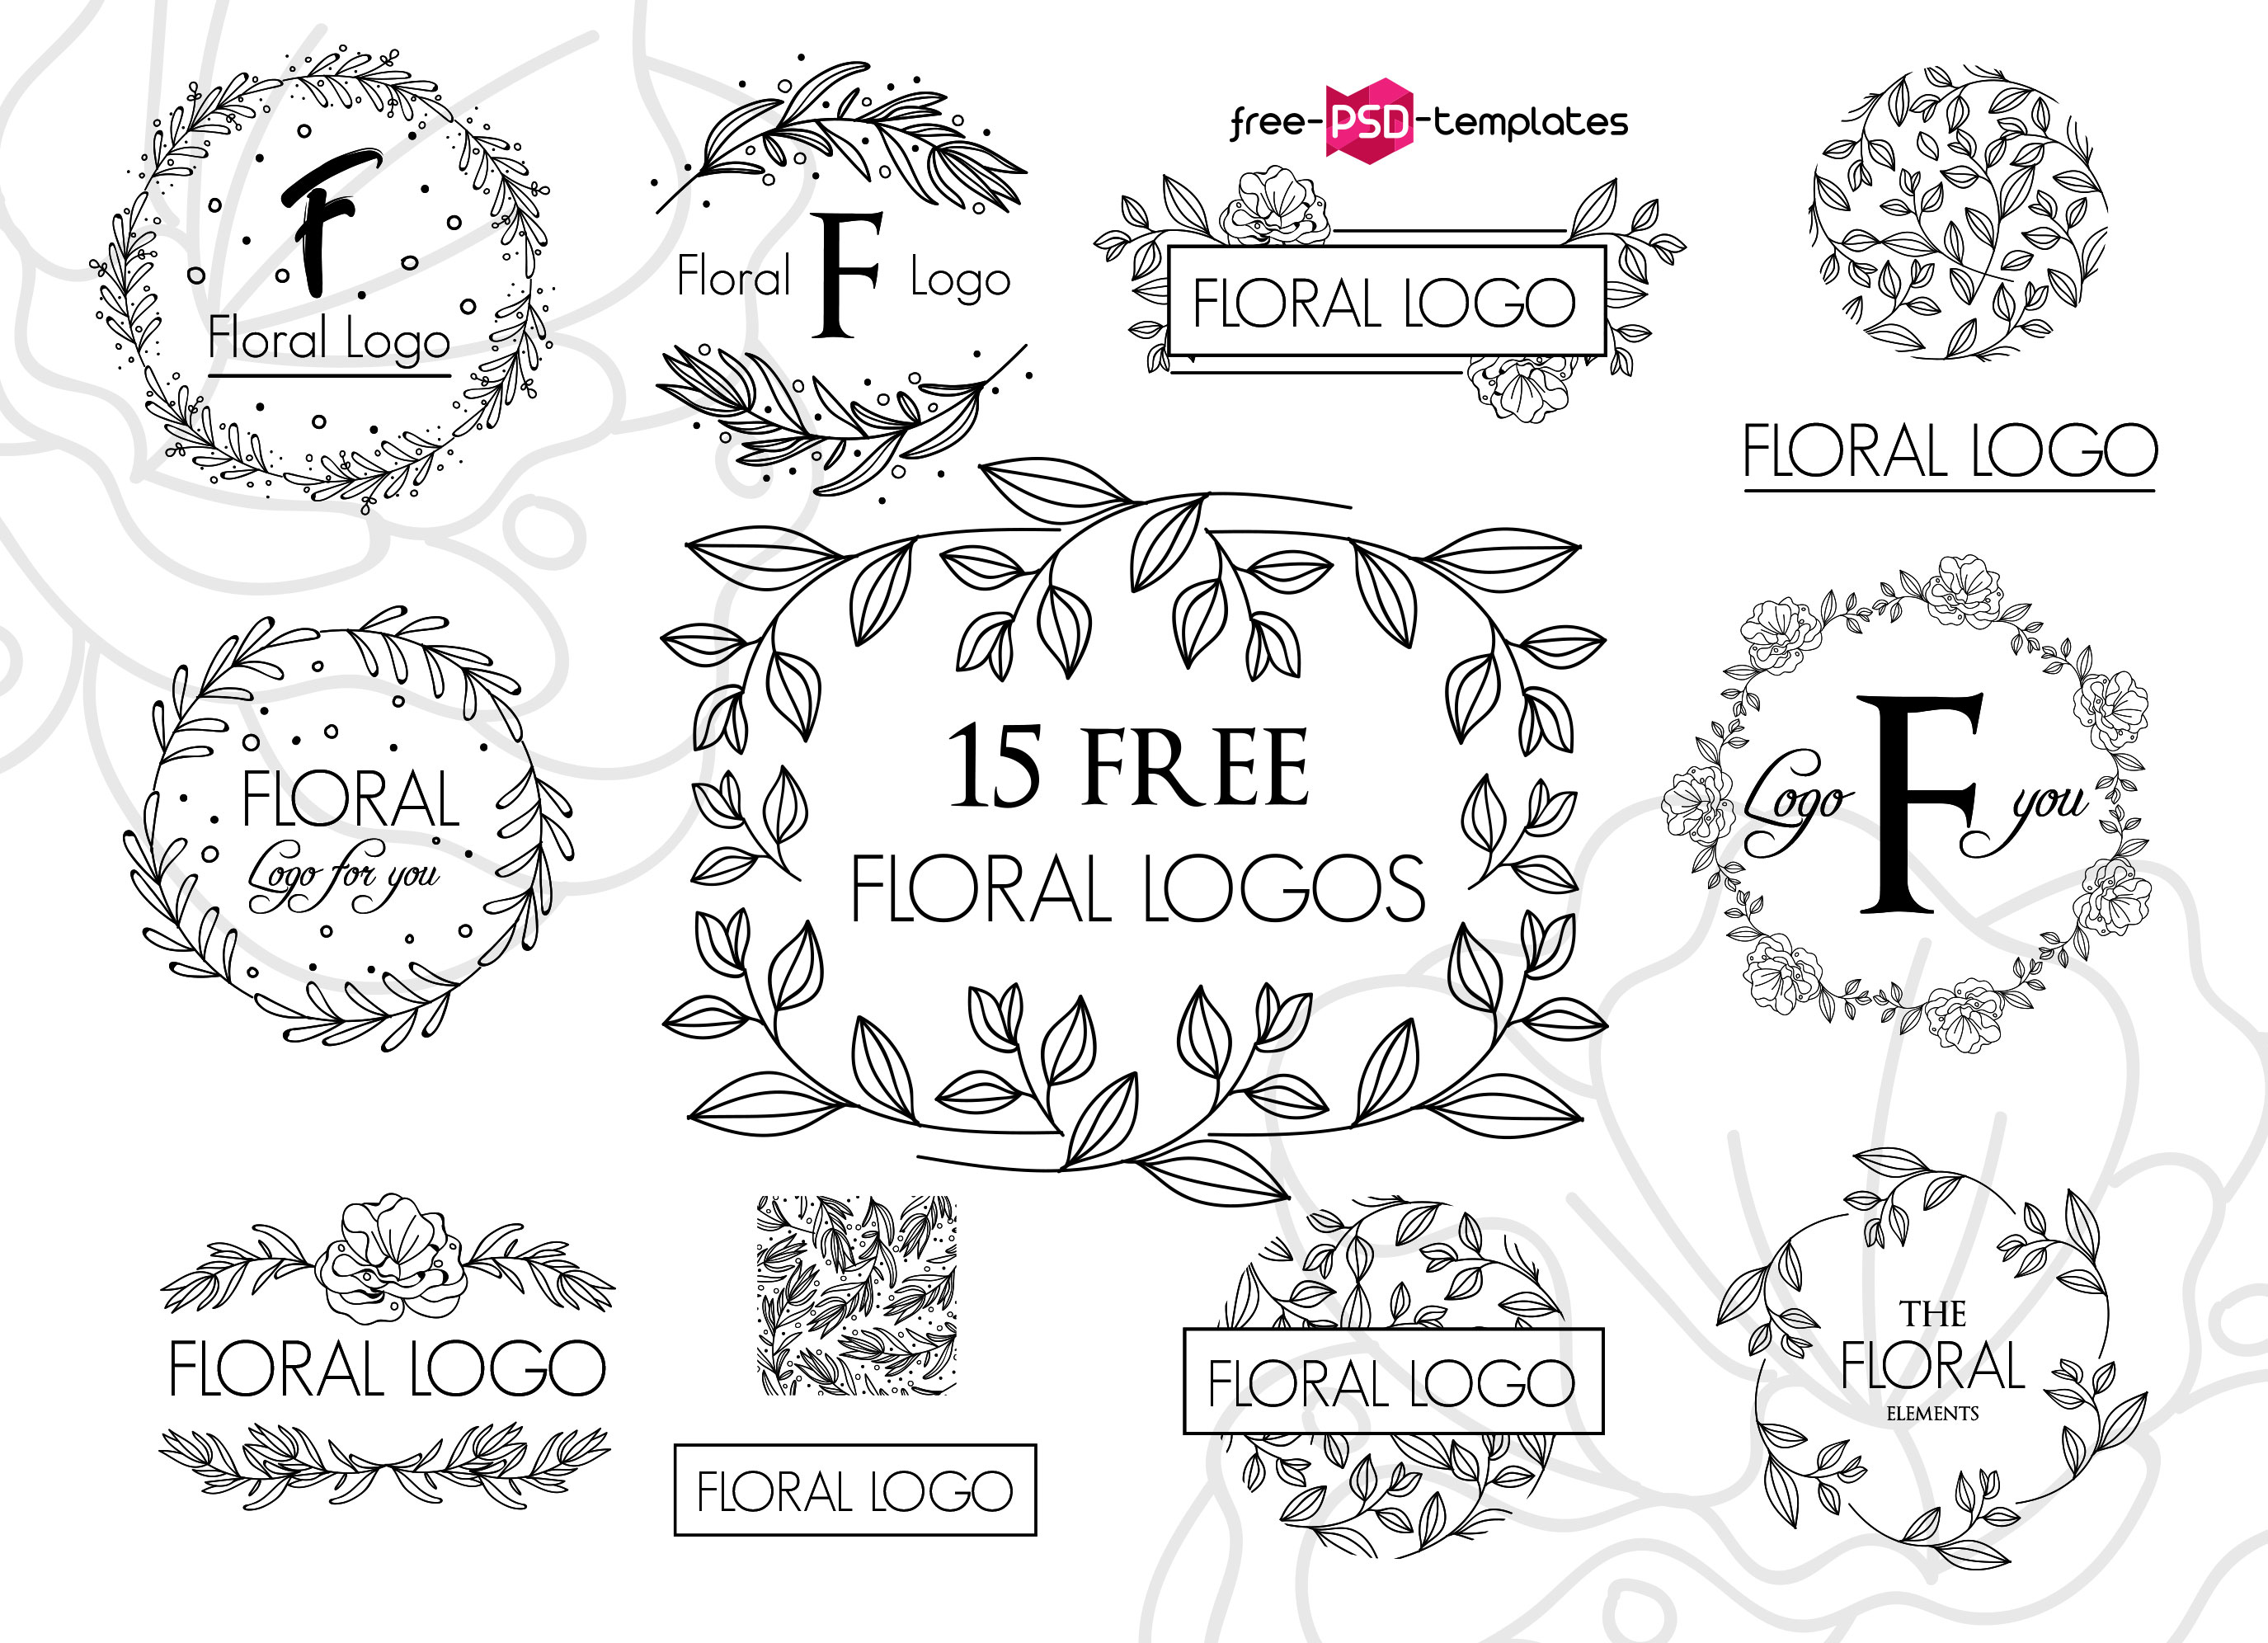 Download 86+ Absolutely Free Logos templates for business and ...